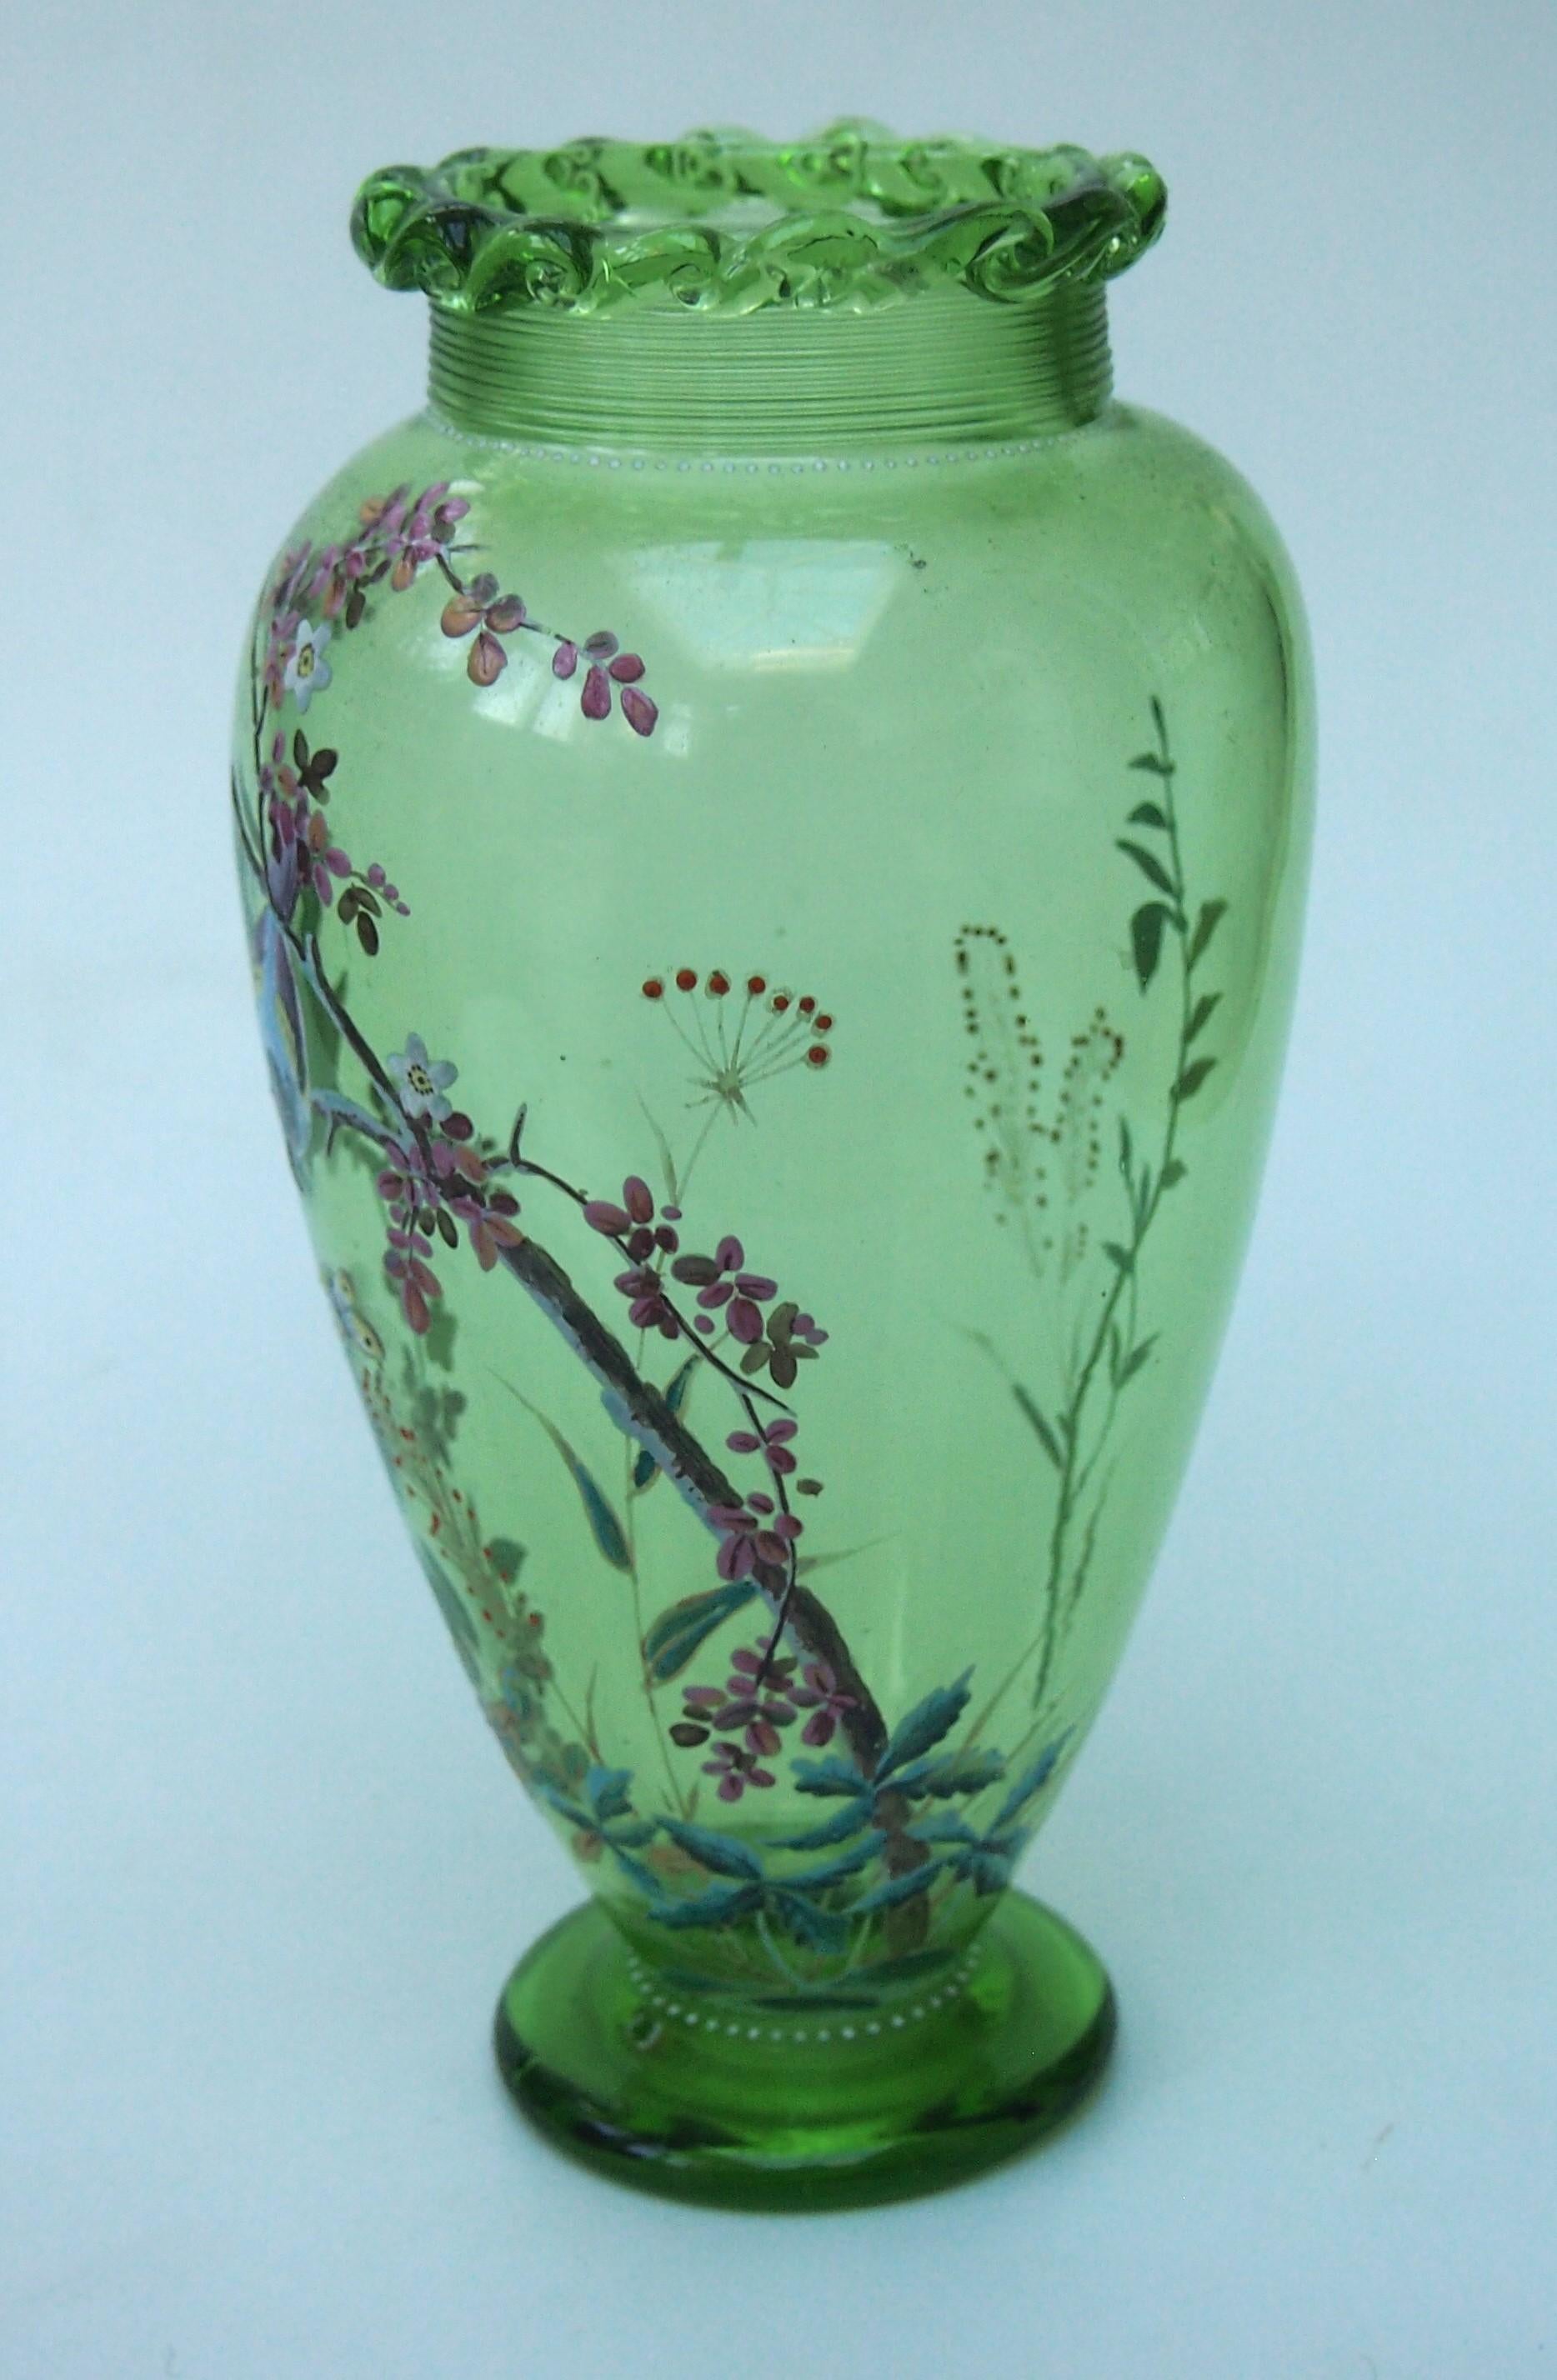 Good example of a footed enamelled green glass vase by Harrach c1890. The vase is decorated with a piped glass top and fine banding just below -It is finely polychrome enamelled with a cute scene of two birds (possibly blue tits)  sitting in